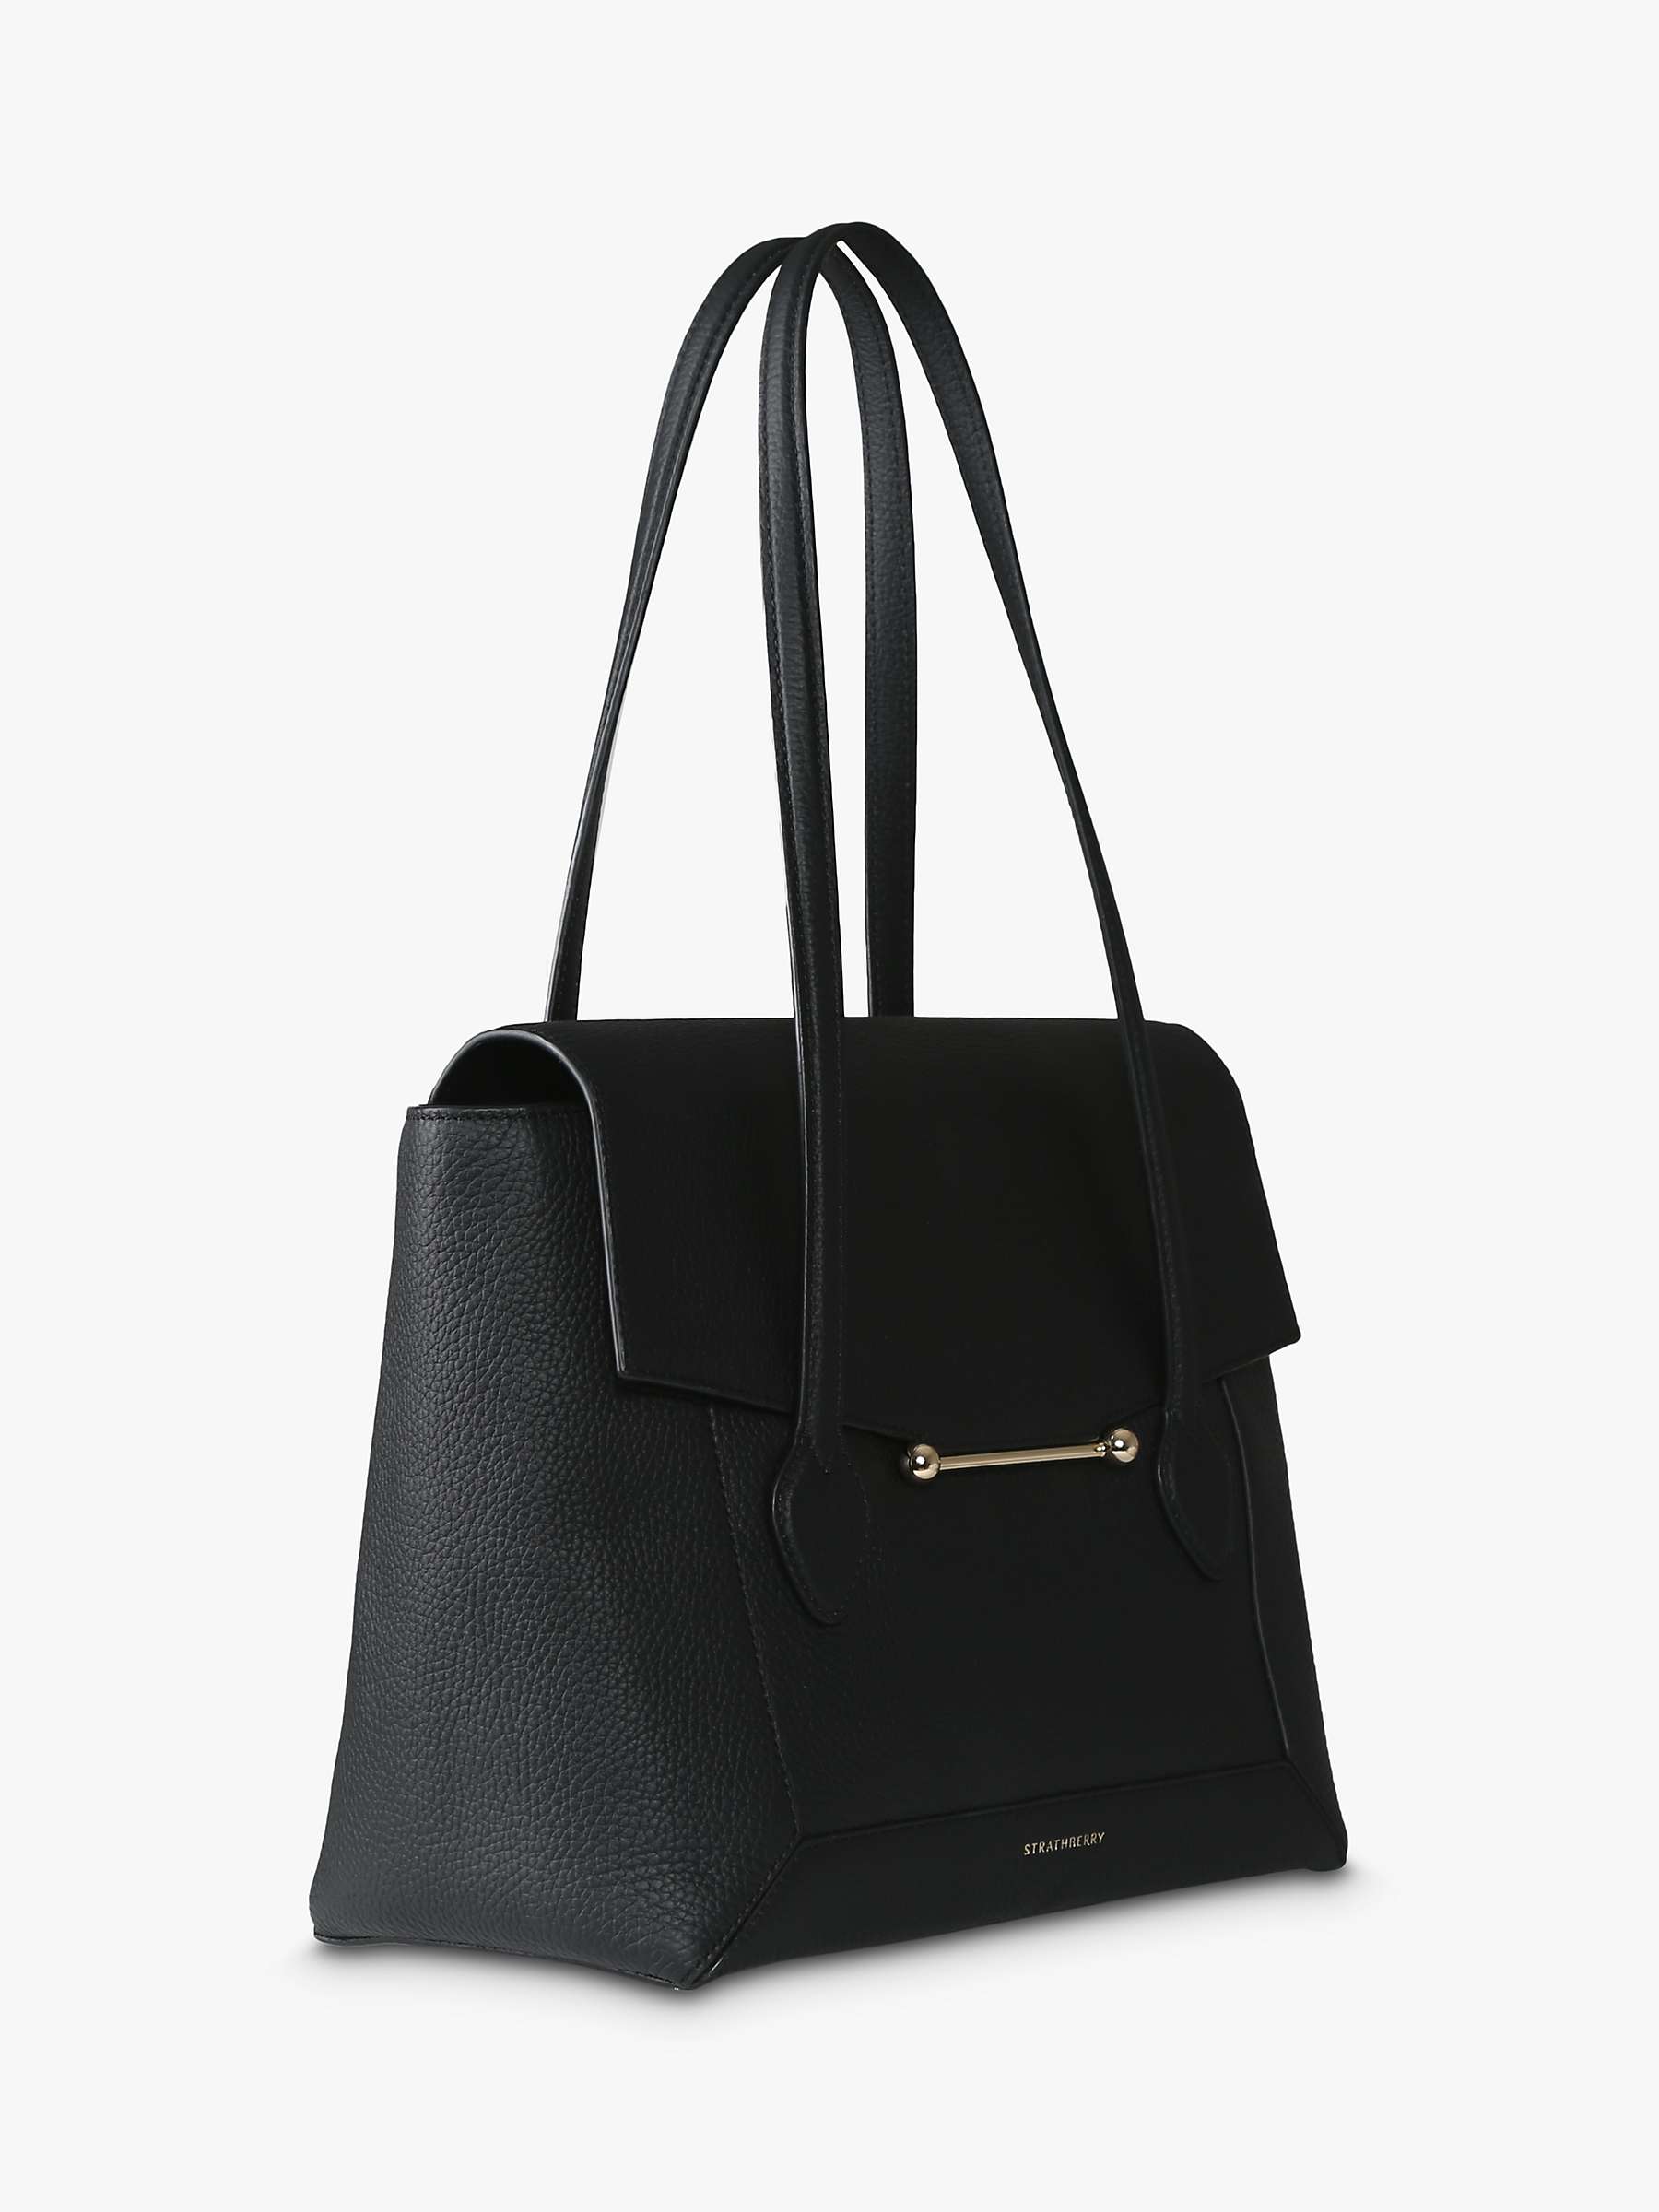 Buy Strathberry Mosaic Tote Online at johnlewis.com